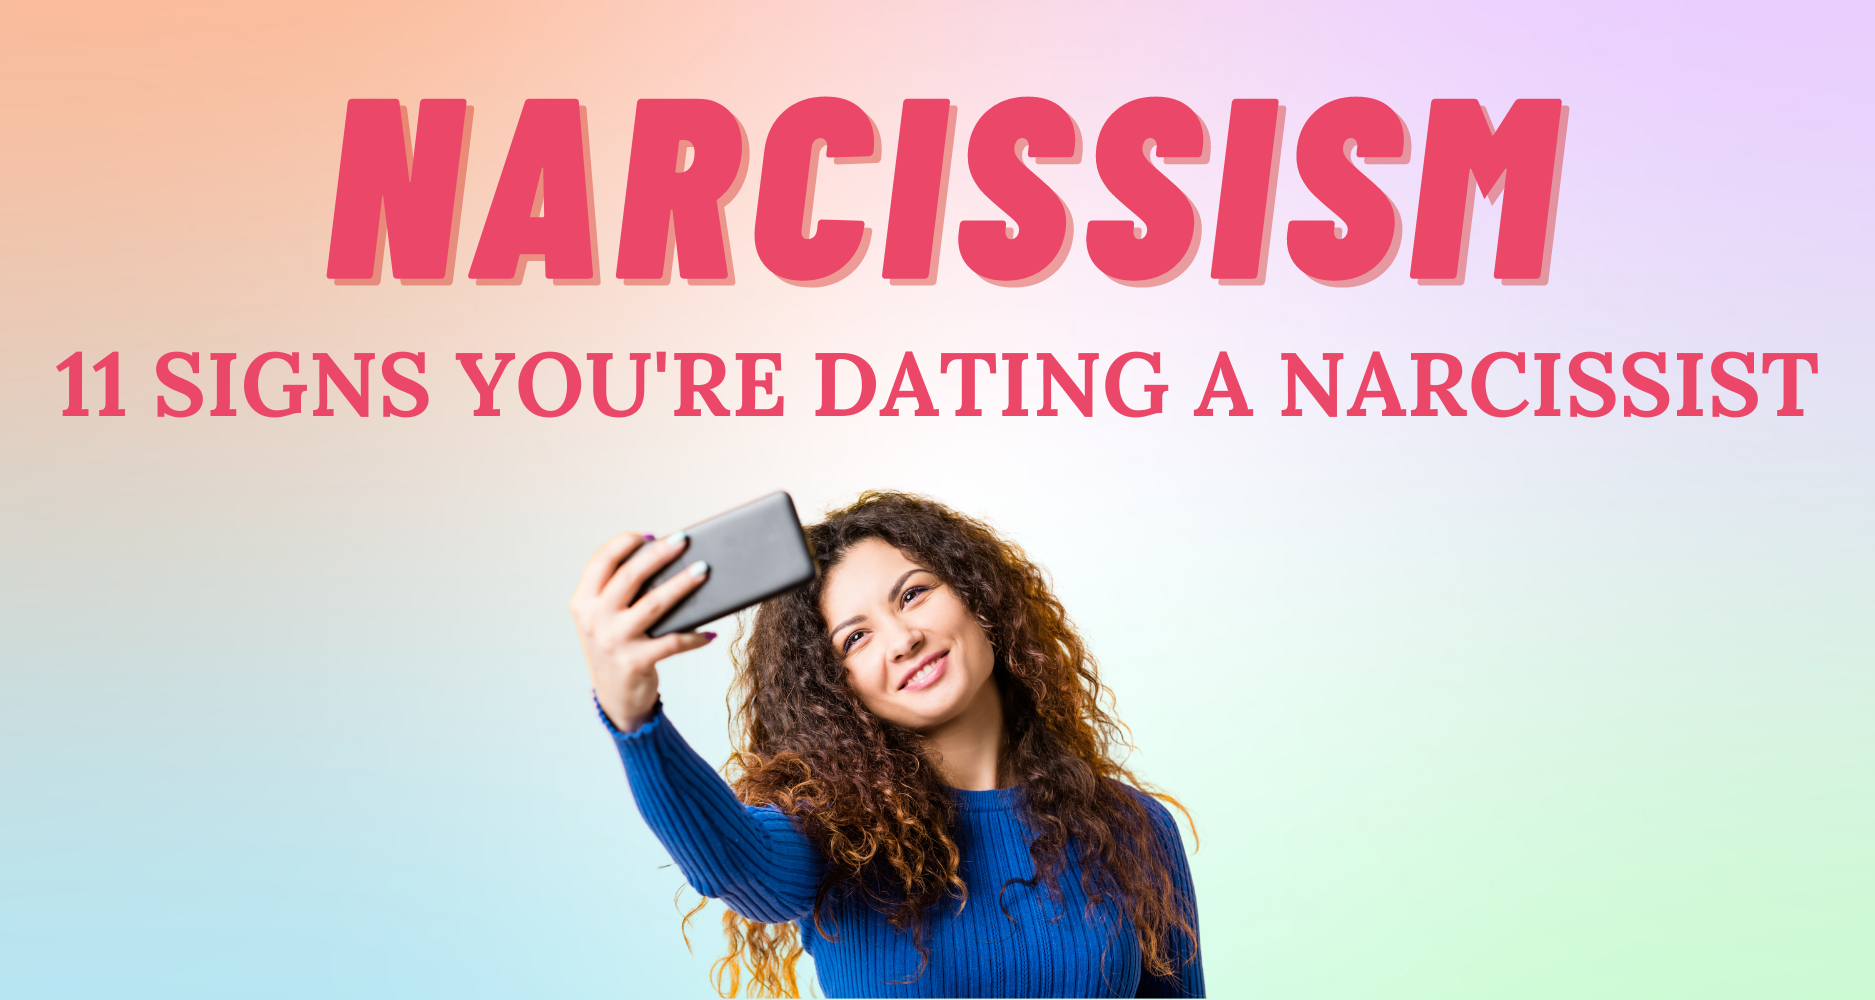 5 Signs to Spot a Narcissist